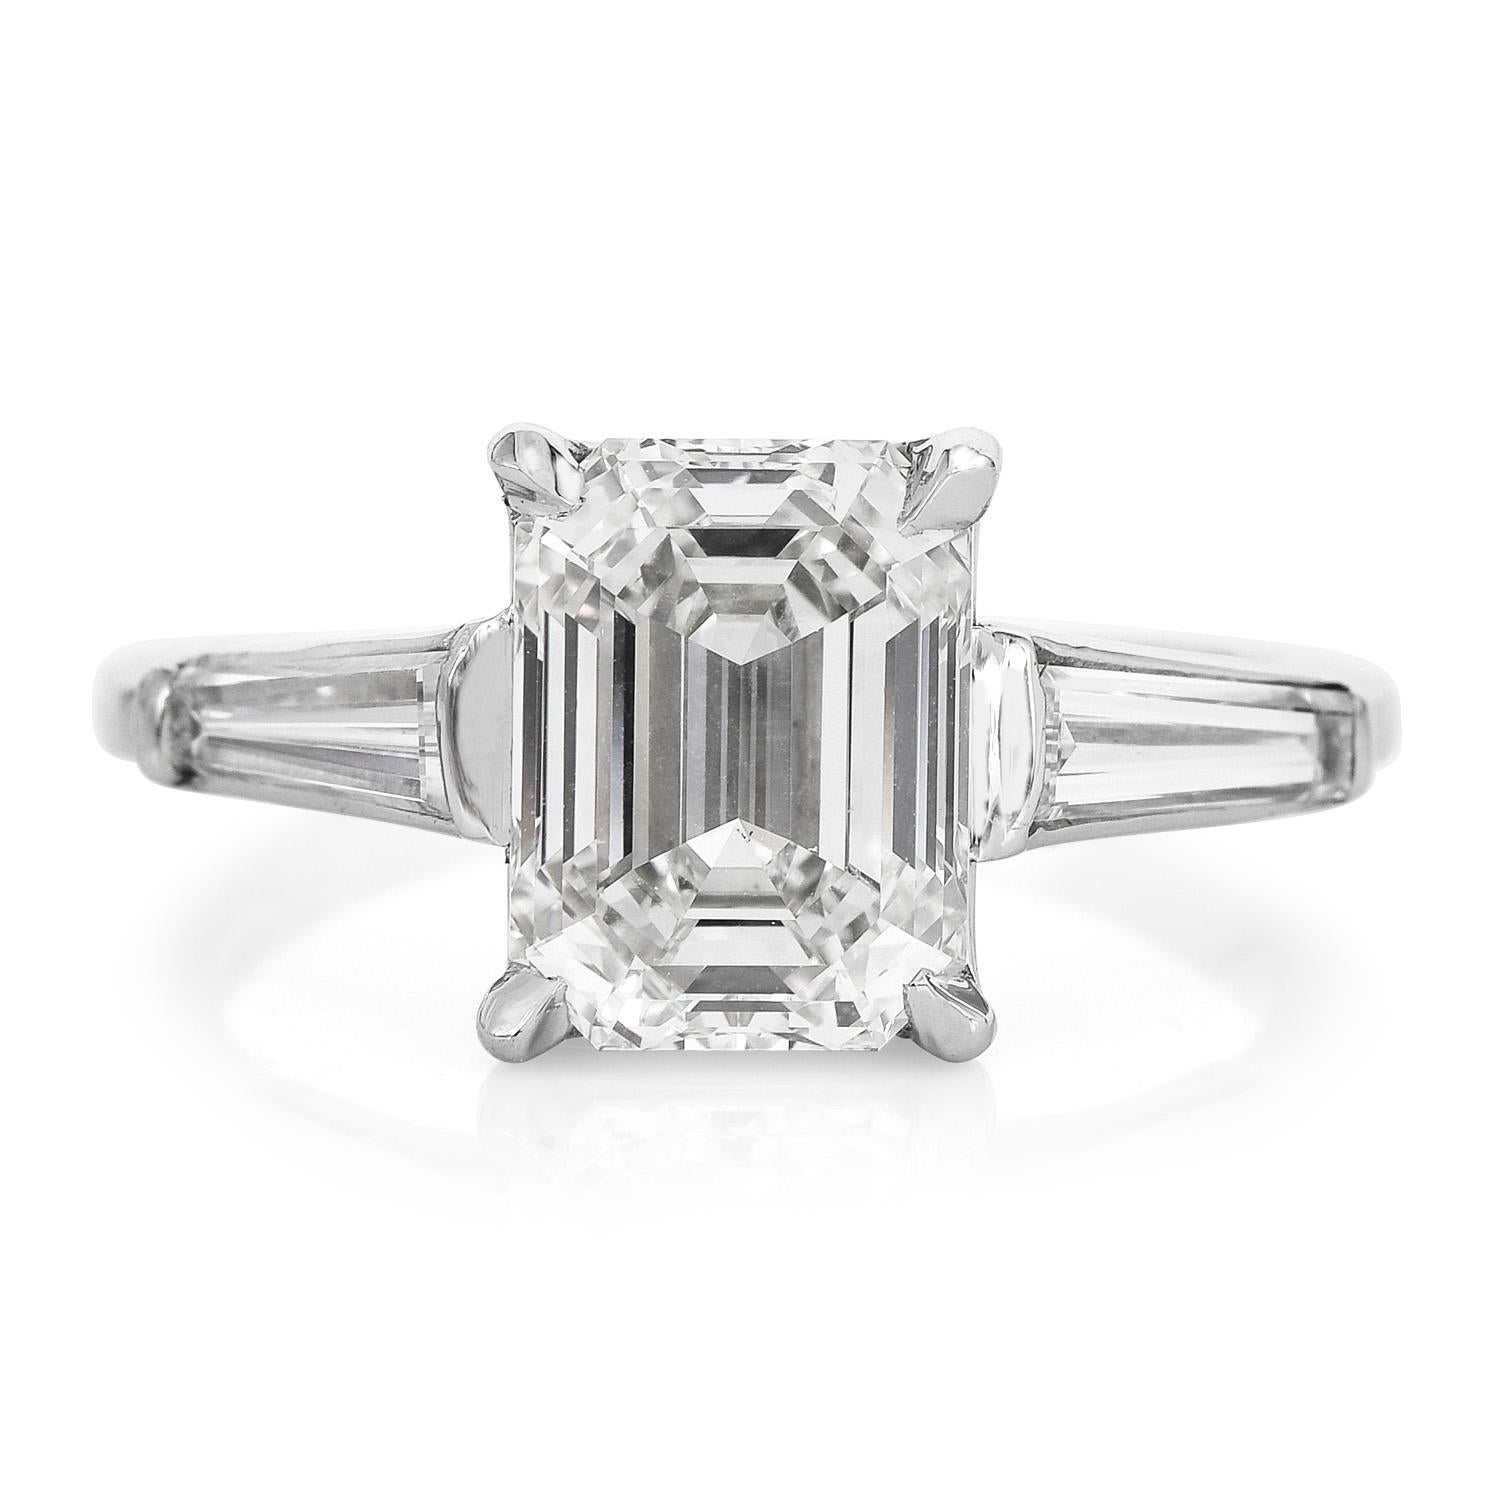 This beautiful classic diamond engagement ring is crafted in solid platinum.

Showcasing a classic design, it is centered with one genuine emerald- Cut Diamond,

3.06, J color, VS1 clarity, GIA Graded,  prong set. The center stone is accented with 2